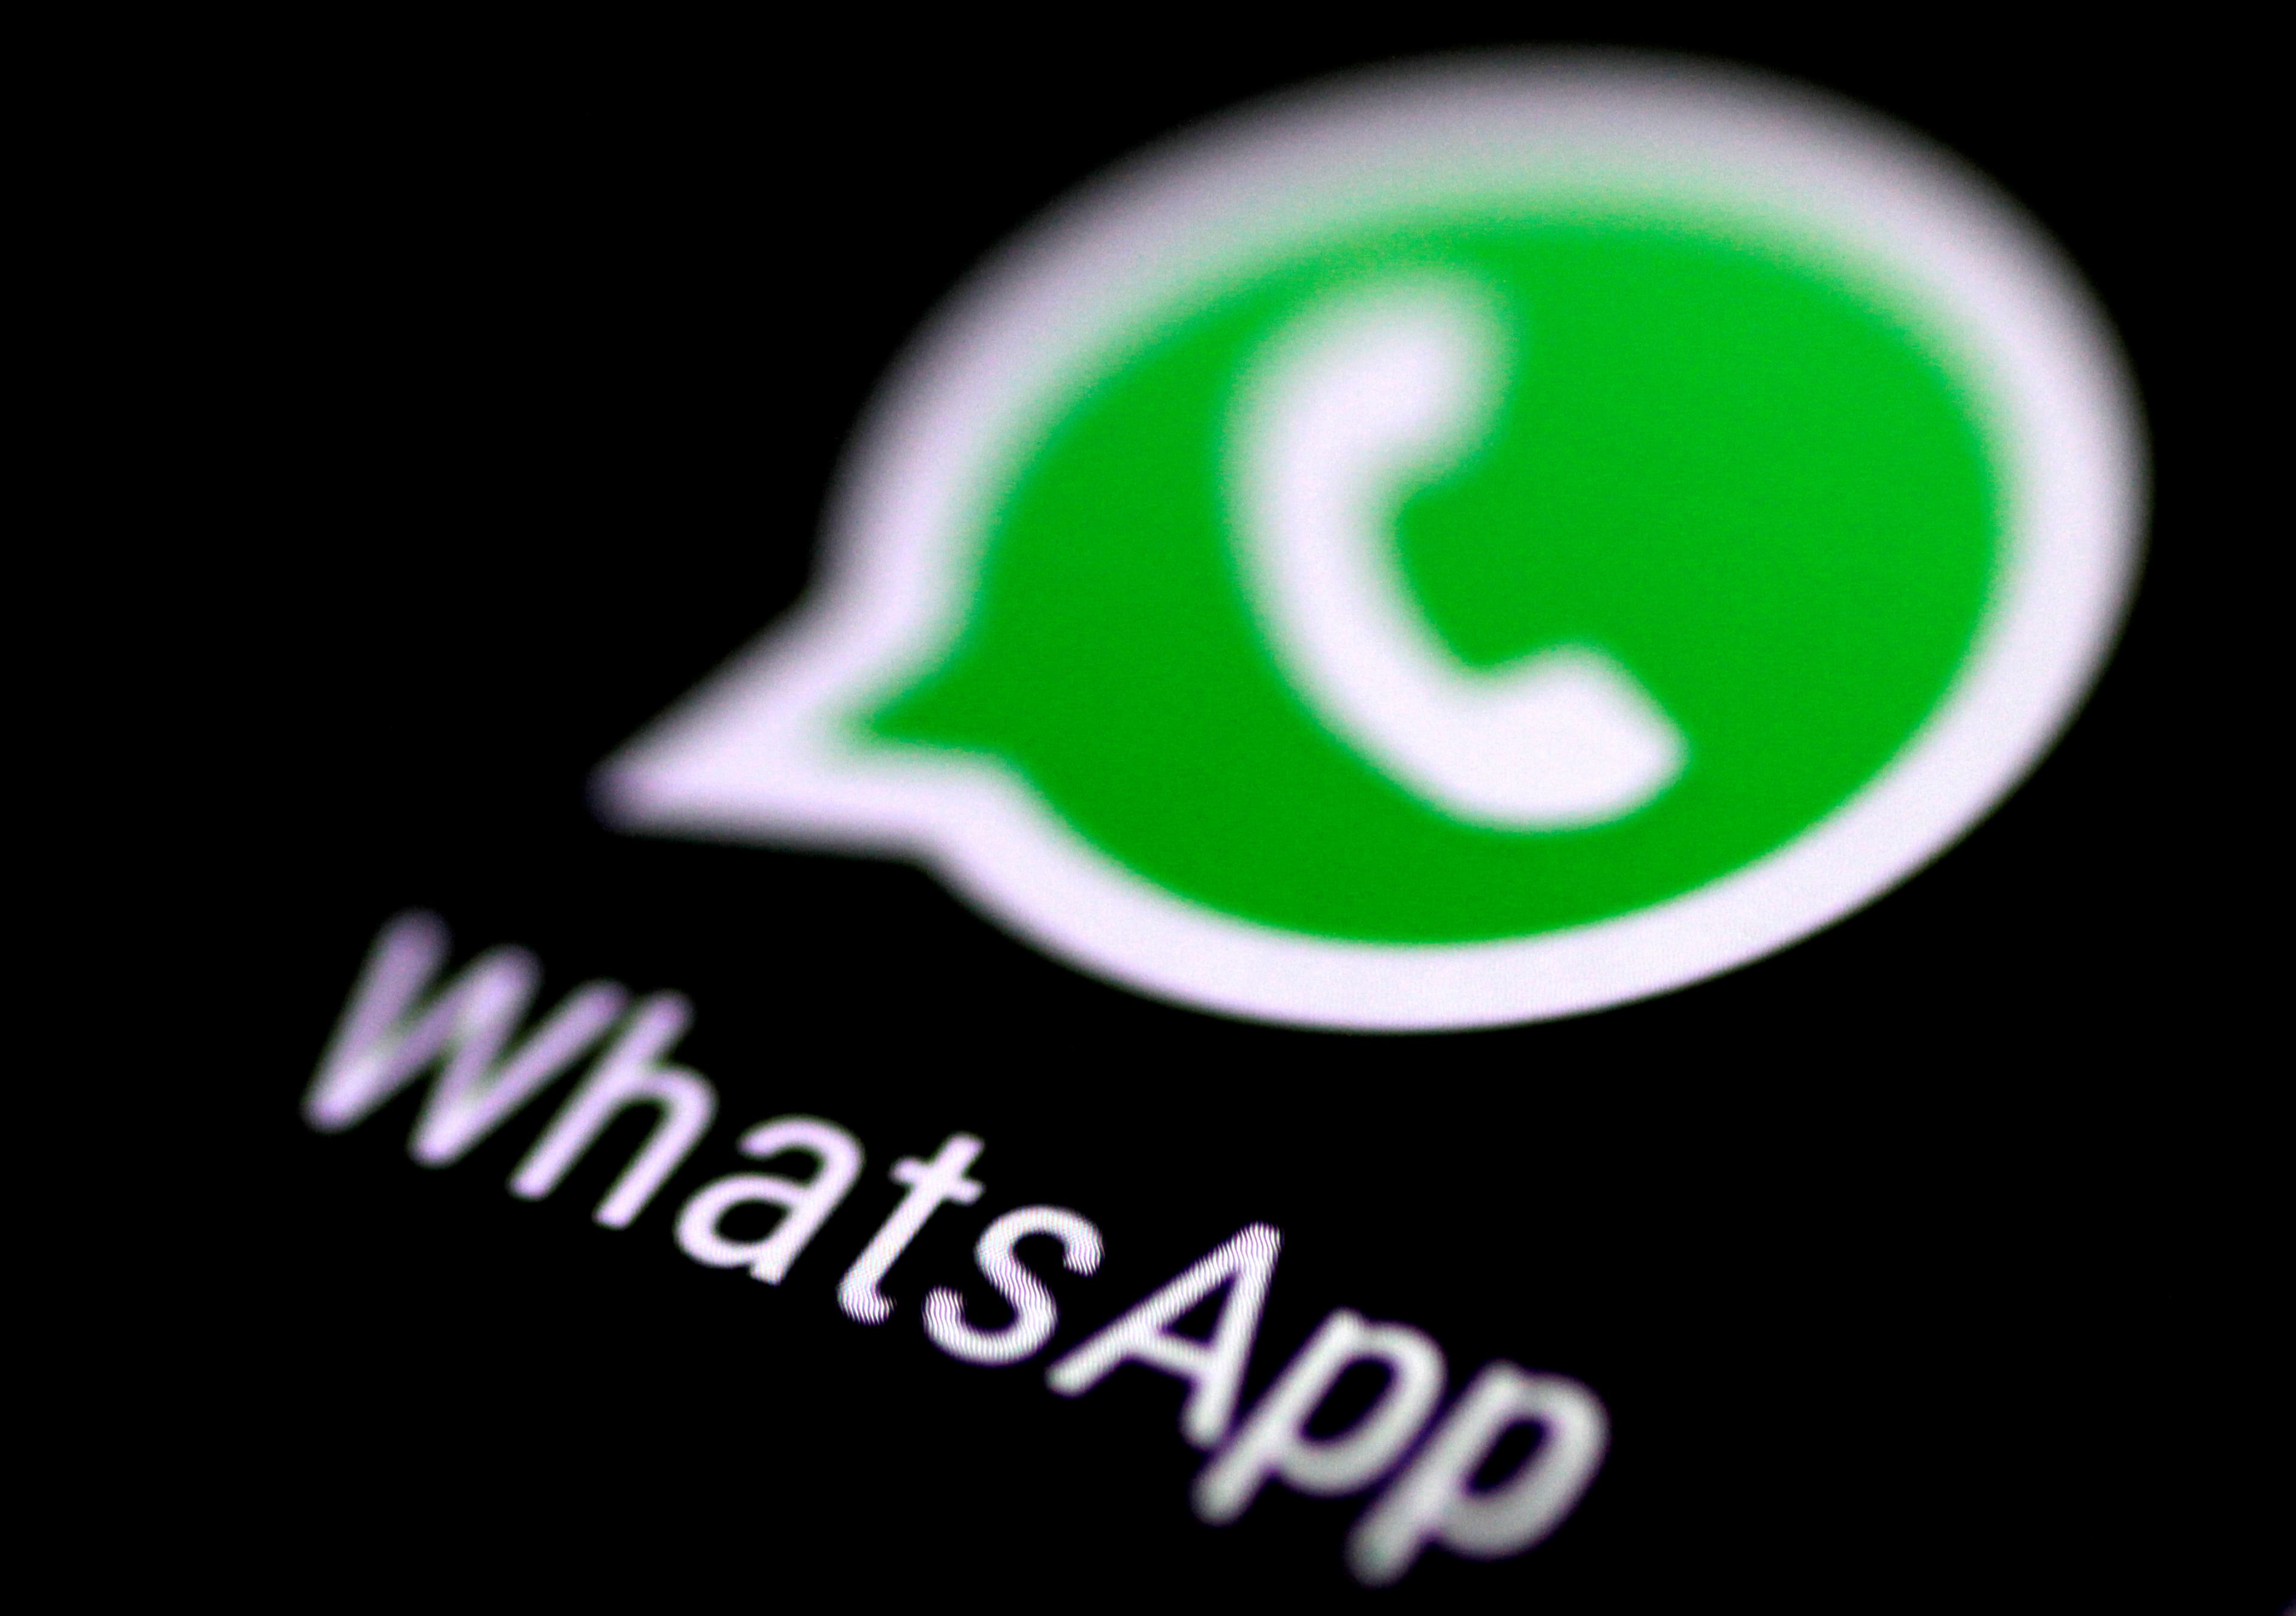 THESE WhatsApp features will stop working after May 15 if you don’t accept new privacy policy